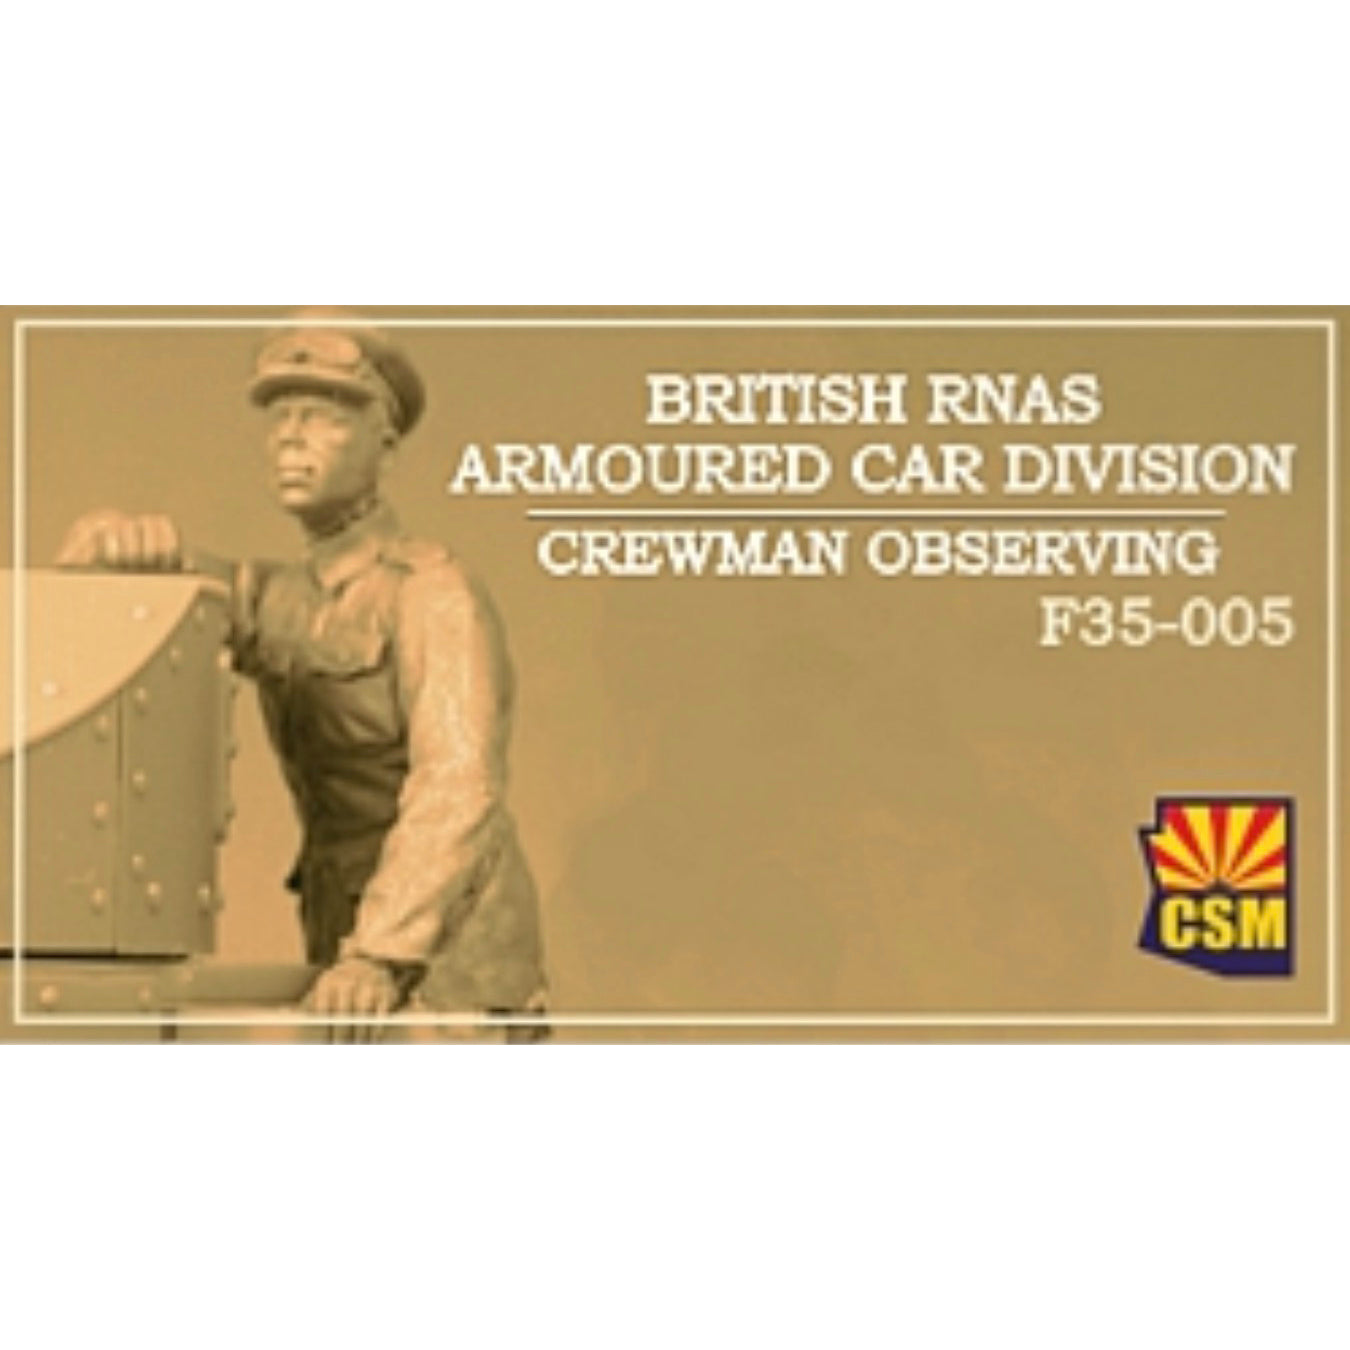 Copperstate Models 1/35 British RNAS Armored Car Crewman Observing F35-005